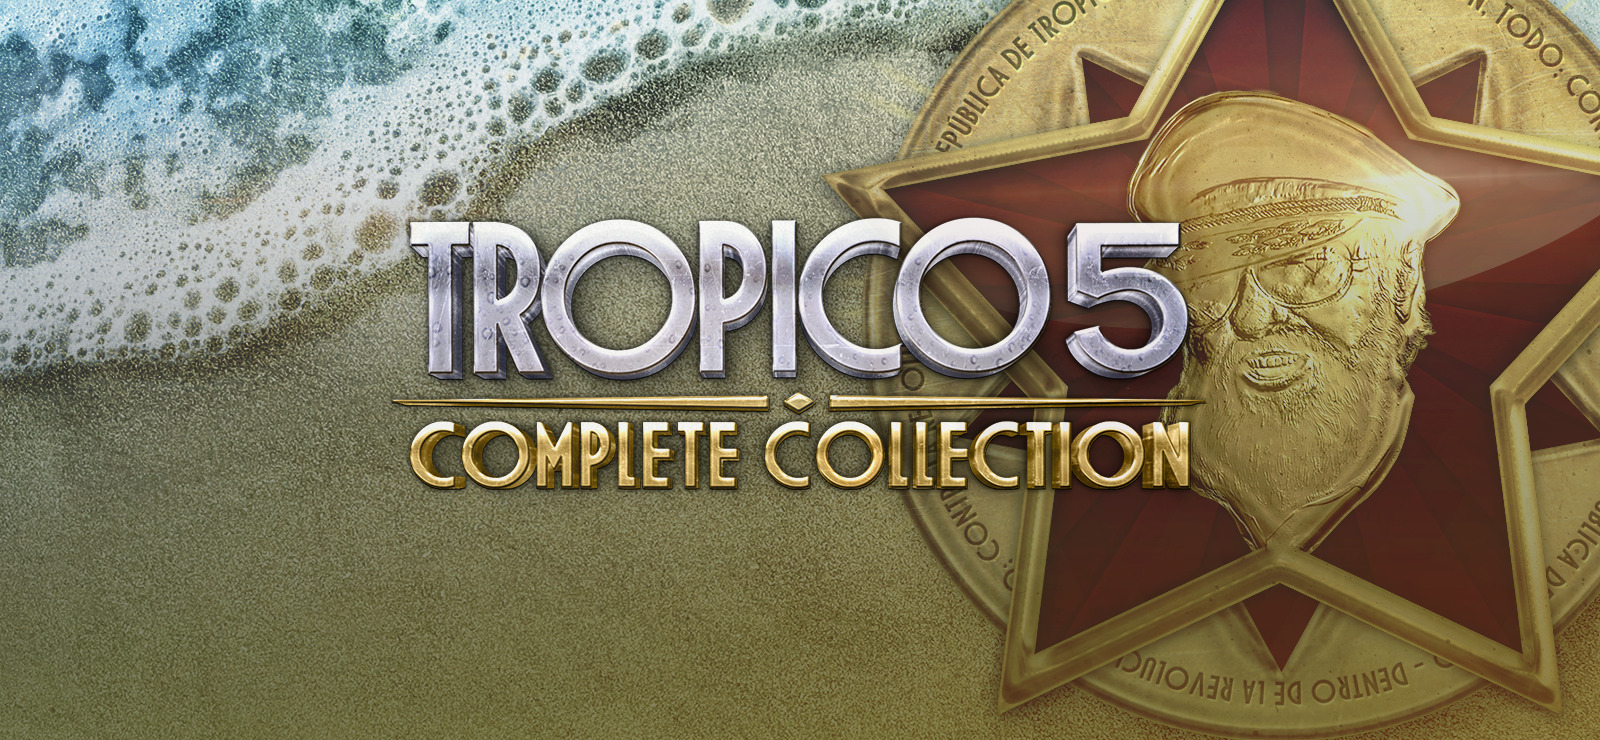 50 Tropico 5 Complete Collection On Gog Com